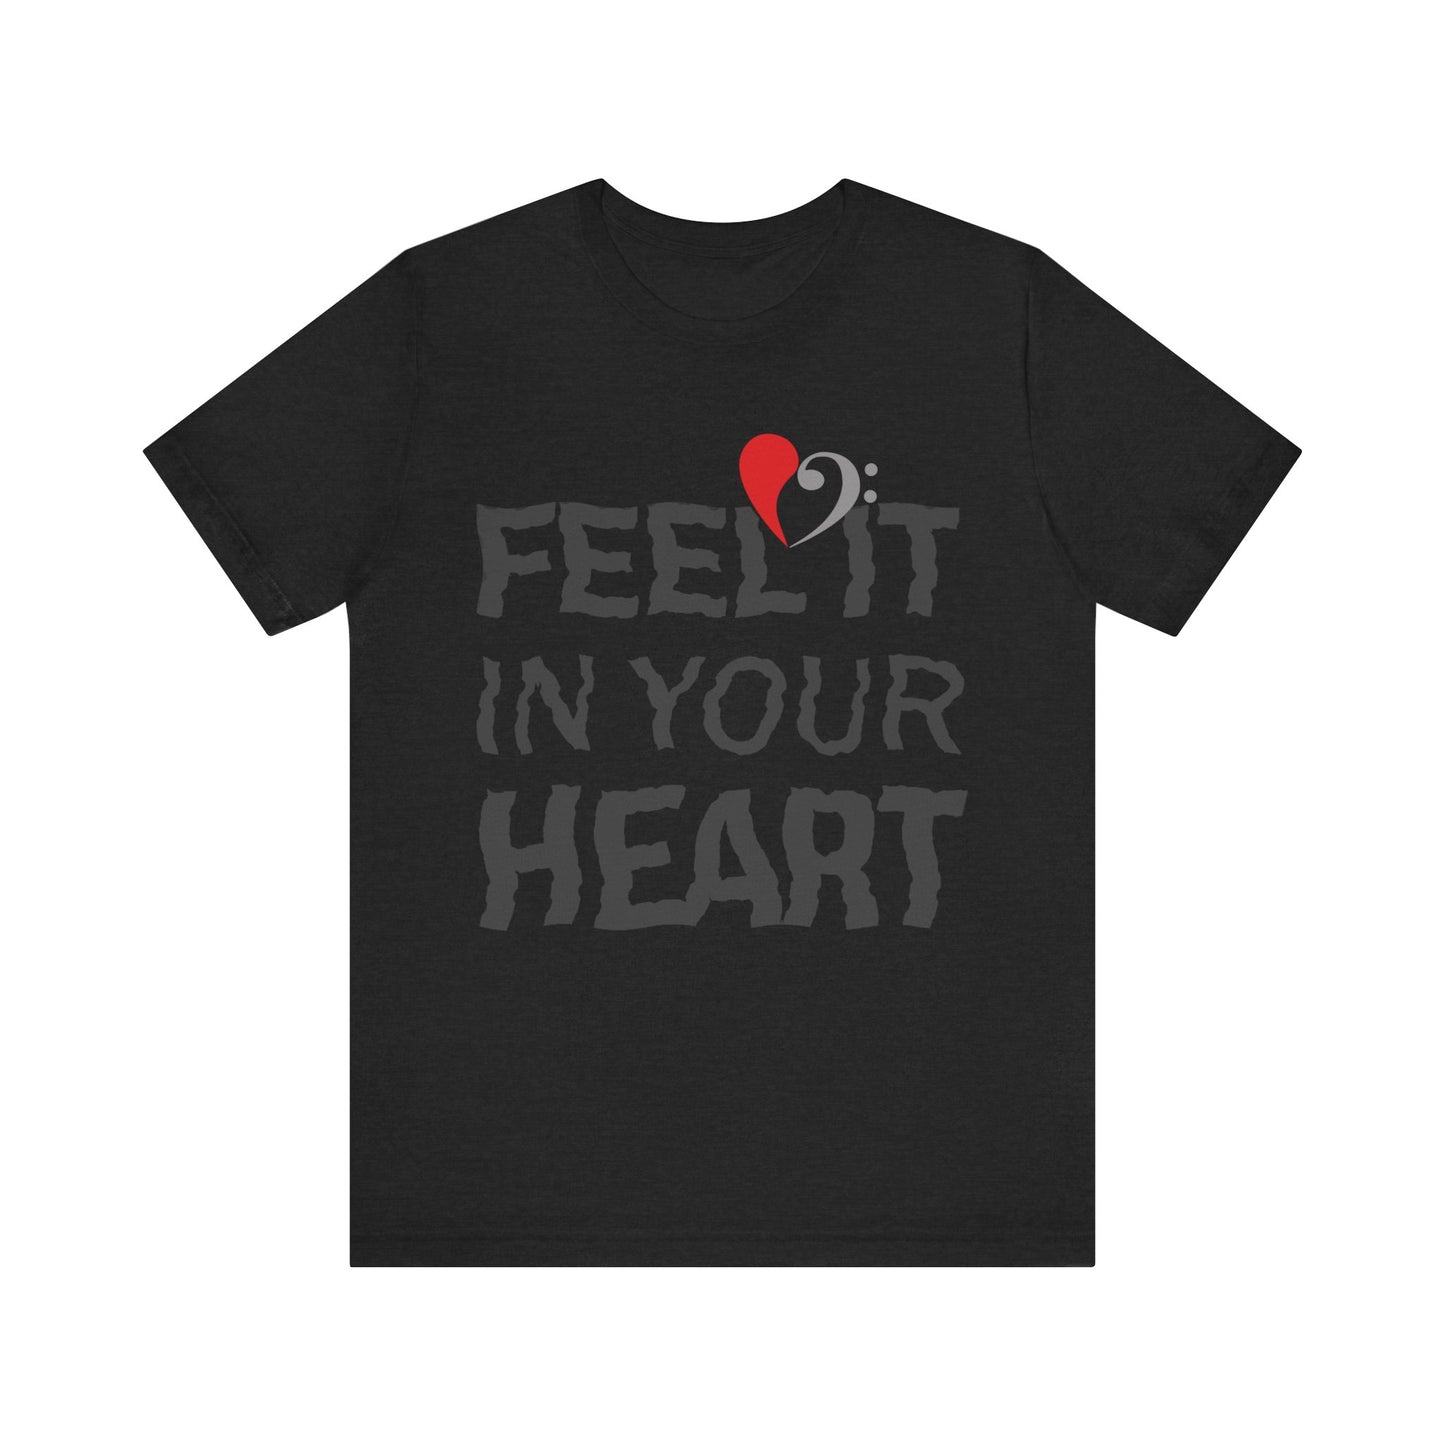 Feel It In Your Heart, Bass Love T-shirt, Gift for Bass players, Heart with Bass Clef, Unisex Bella+Canvas 3001 Tee